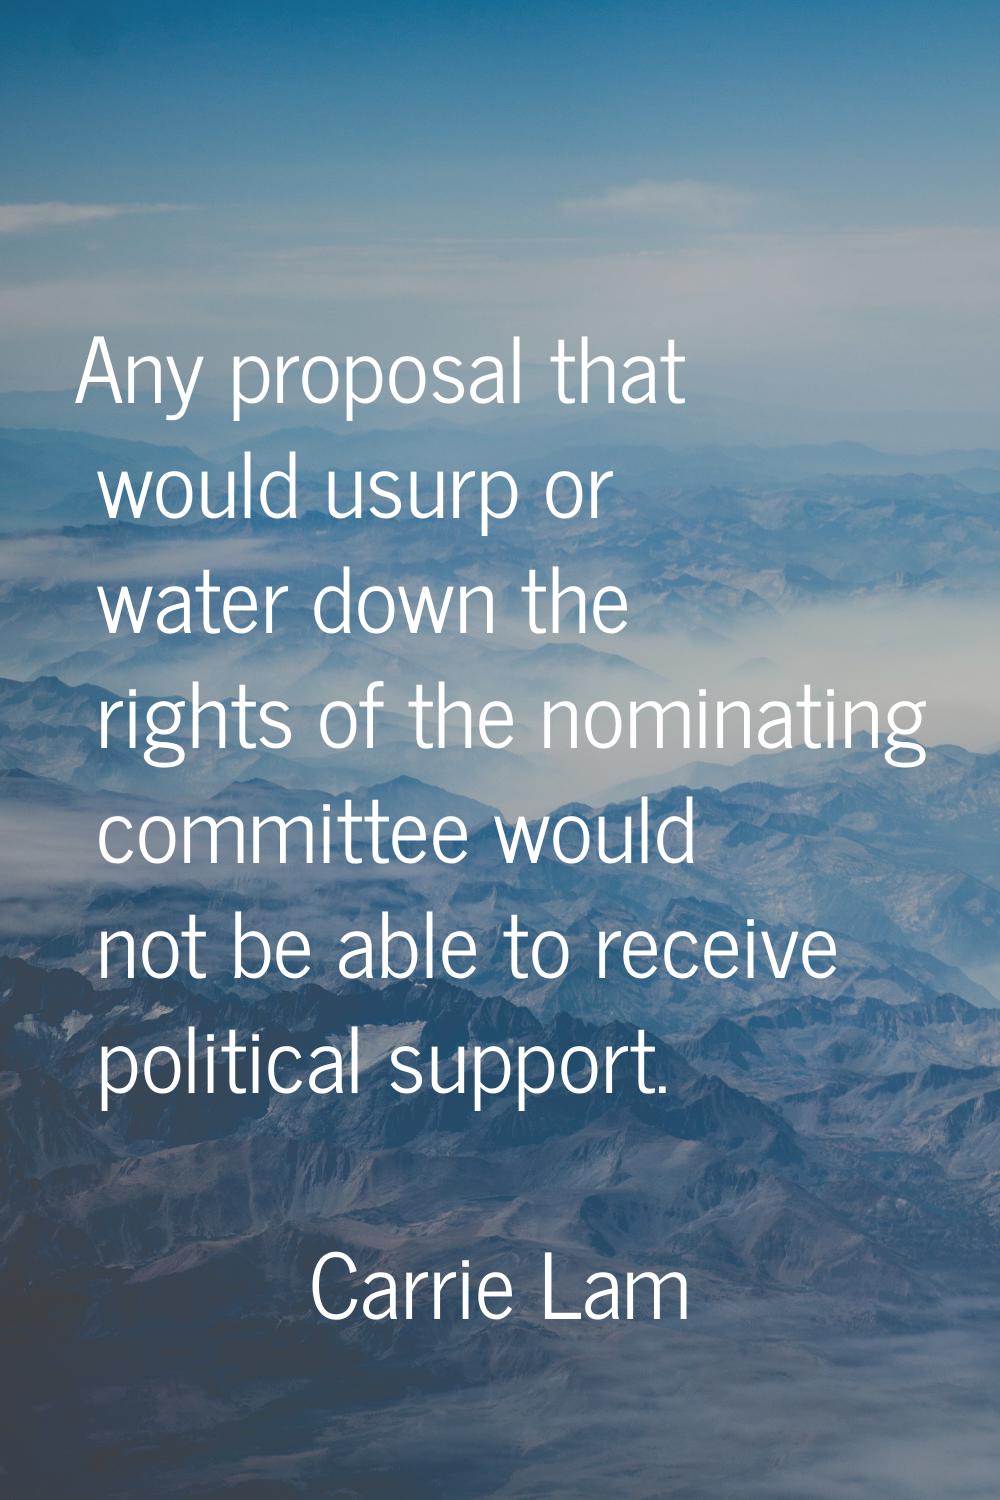 Any proposal that would usurp or water down the rights of the nominating committee would not be abl